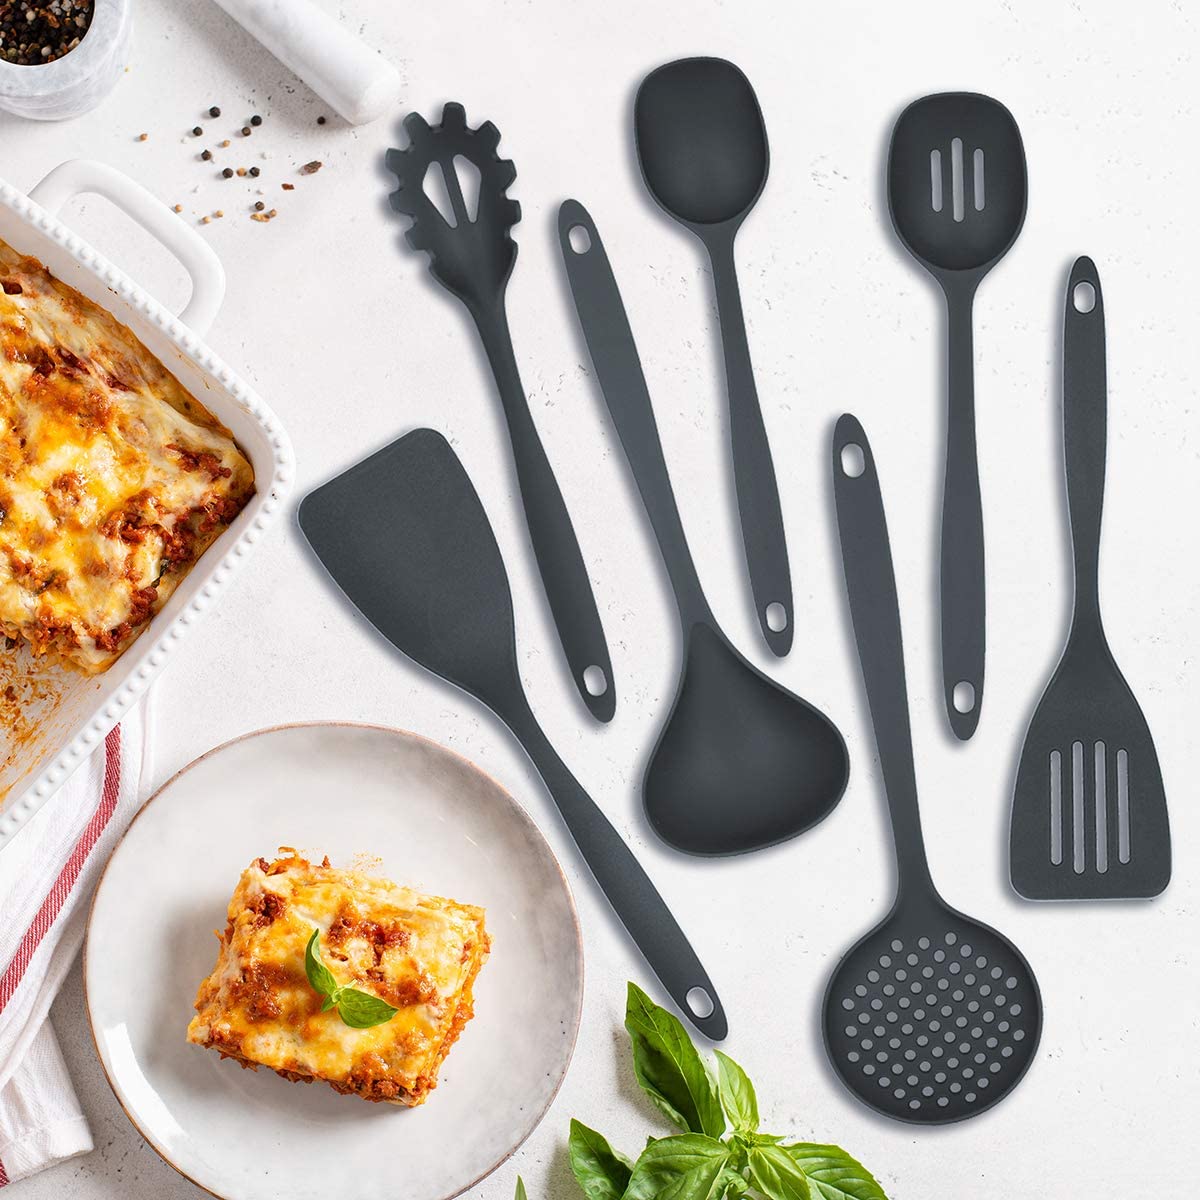 7 Best Kitchen Utensil Sets for Cooking and Baking in Any Kitchen